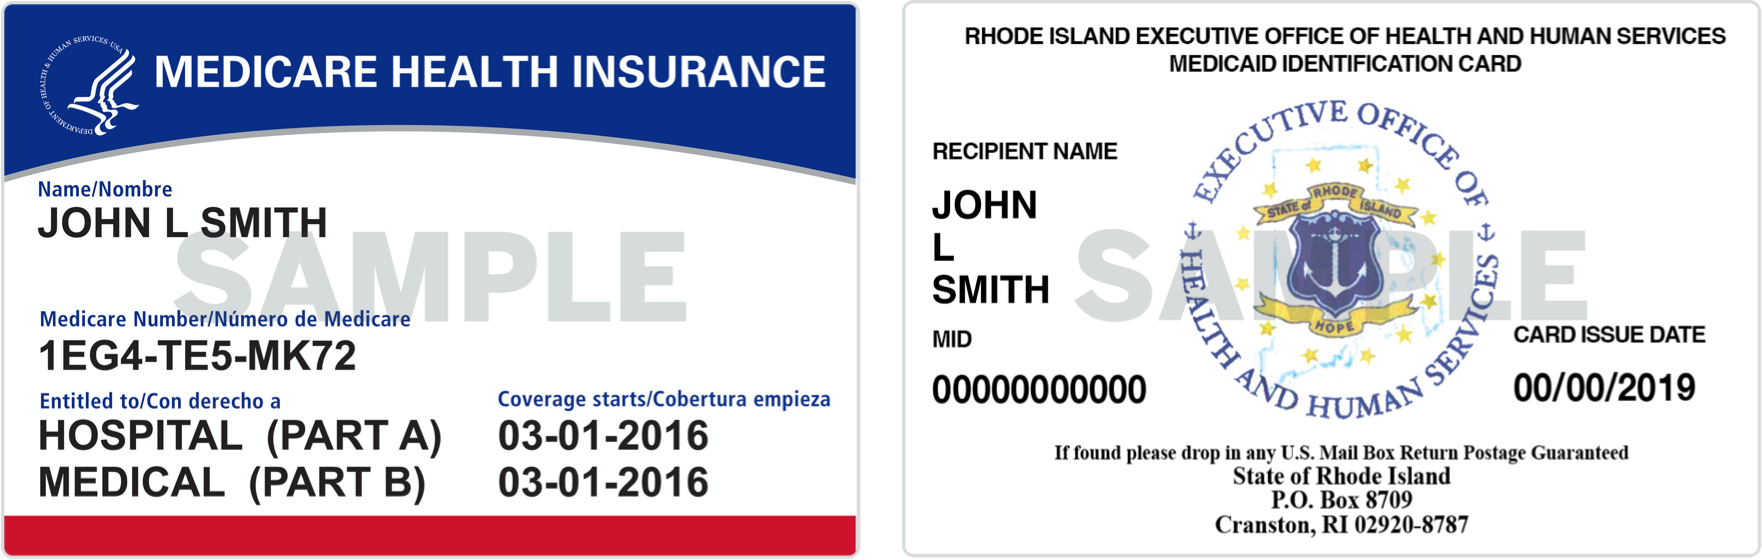 Medicare and Medicaid card samples